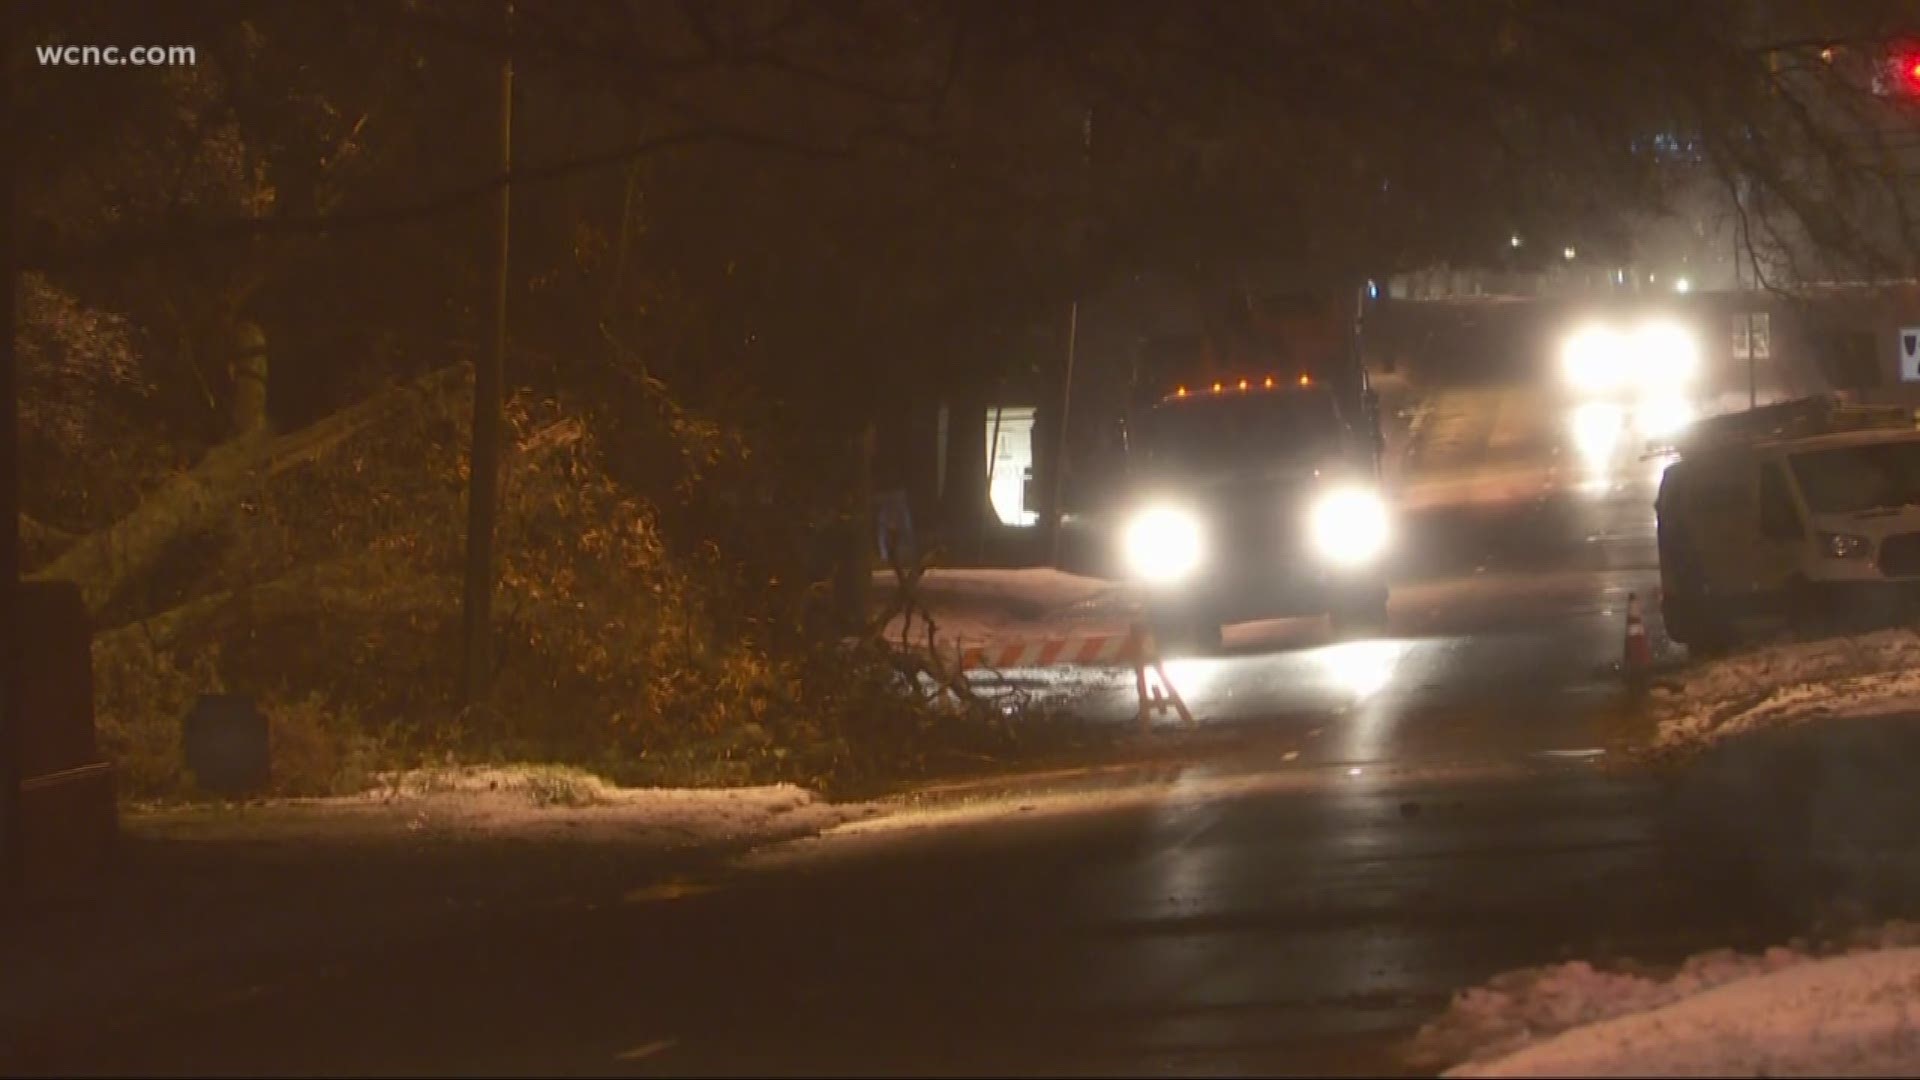 Ice is weighing down trees across the region as the weather gets colder.